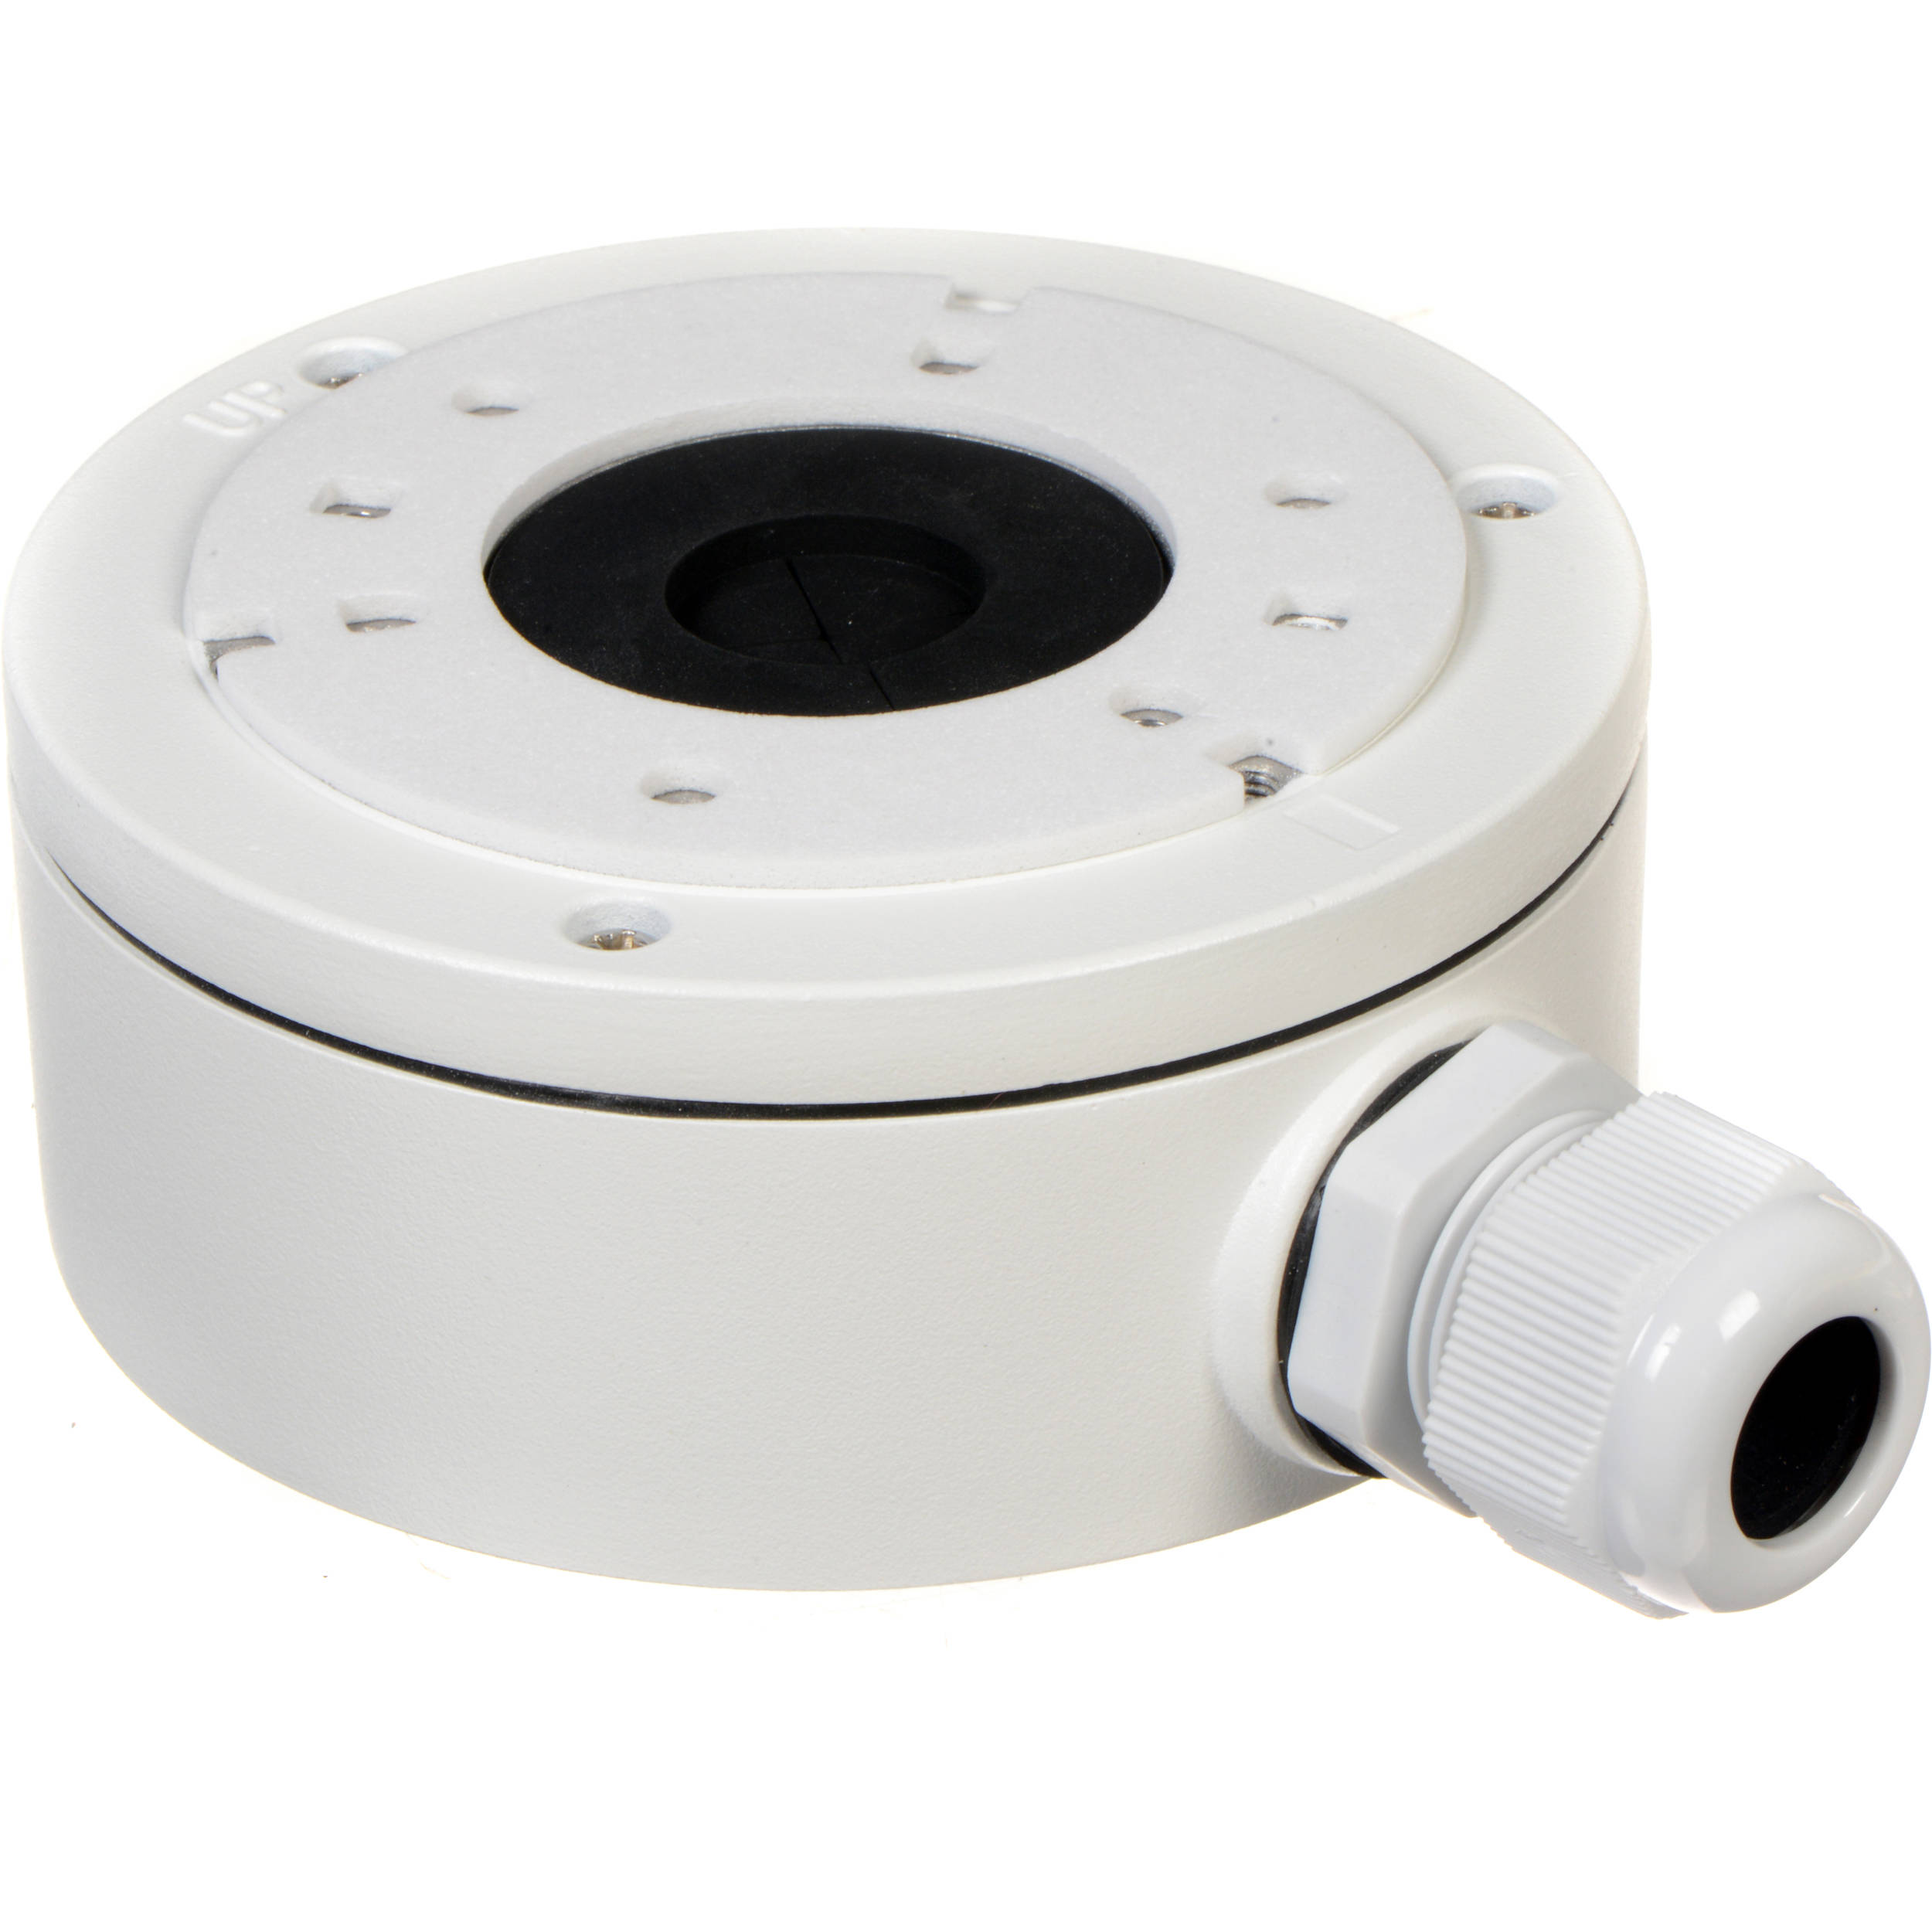 HIKVISION | JUNCTION BOX For
Hikvision Extra Small